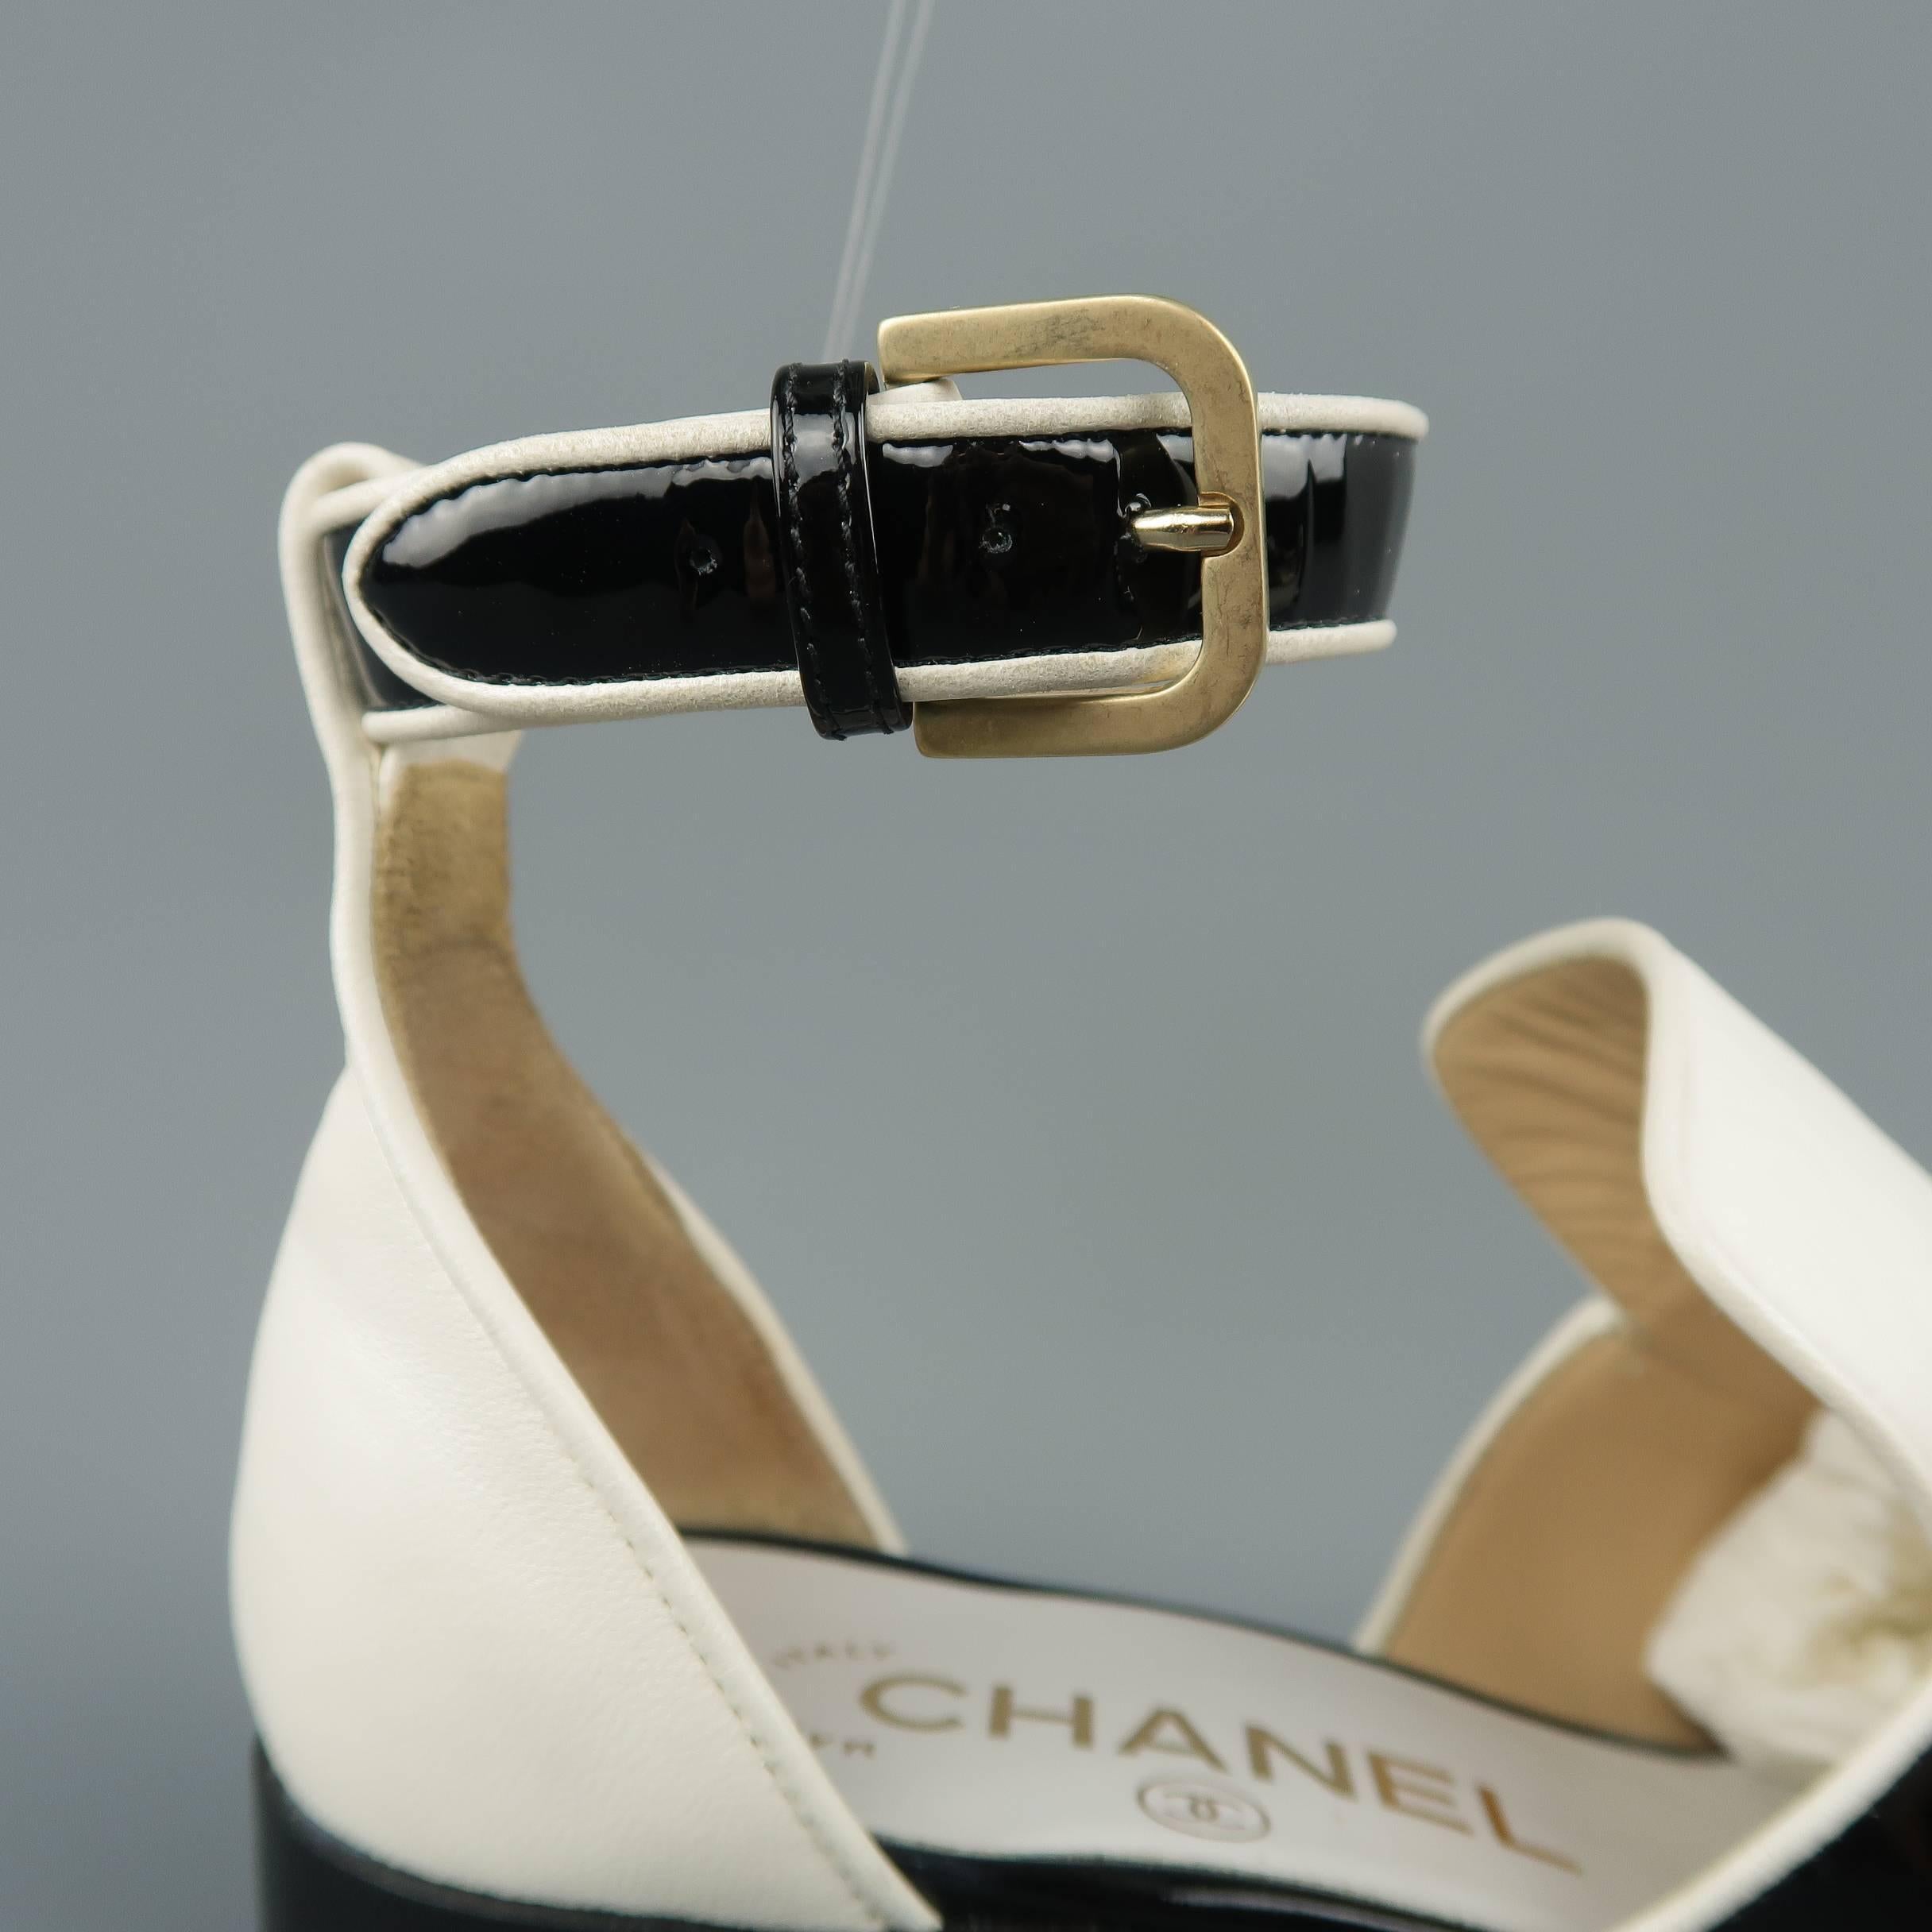 CHANEL loafers come in cream smooth leather and feature a split toe with black patent leather accent, light gold tone metal embossed coin embellishment, open mid section, low heel, and ankle strap. Sole added. Very minor wear. Made in Italy.
